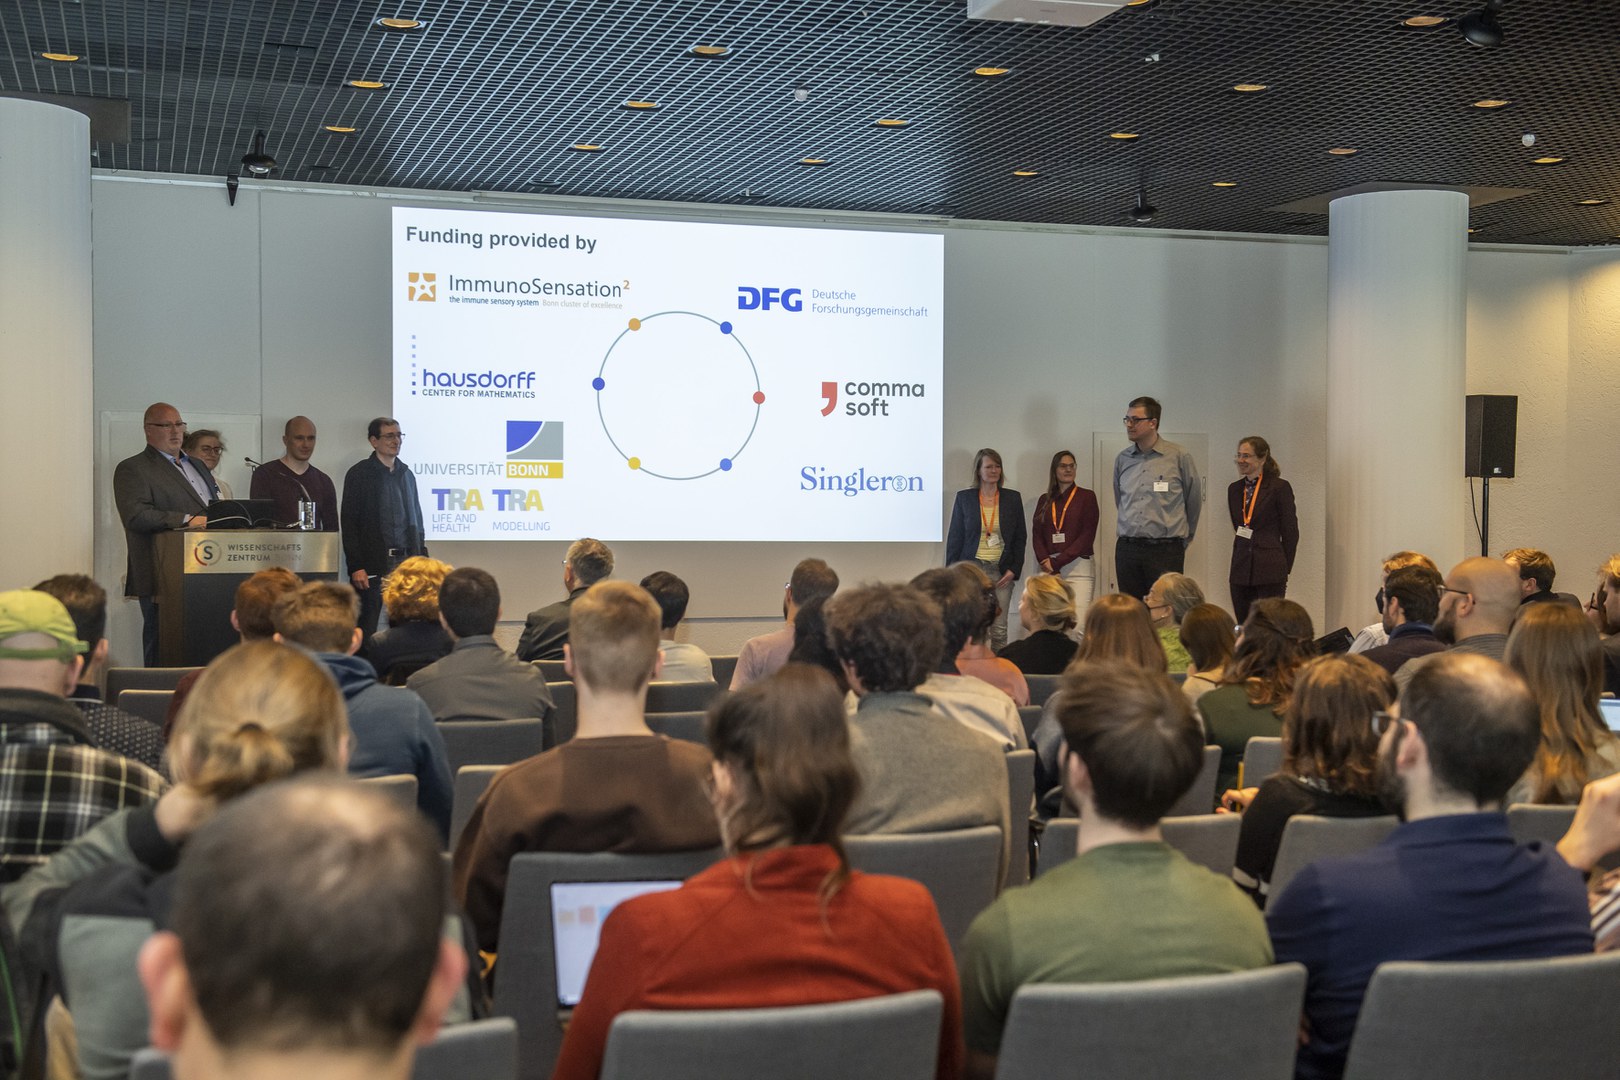 The organizing team welcomed the participants: from left to right Prof. Dr. Jan Hasenauer, Jun-Prof. Dr. Alena Khmelinskaia, Prof. Dr. Alexander Effland, Prof. Dr. Kevin Thurley, Dr. Meike Brömer (TRA "Life and Health"), Dr. Catherine Drescher (ImmunoSensation2), Dr. Daniel Minge (TRA "Modelling") and Dr. Sonja Dames (Hausdorff Center for Mathematics, HCM).